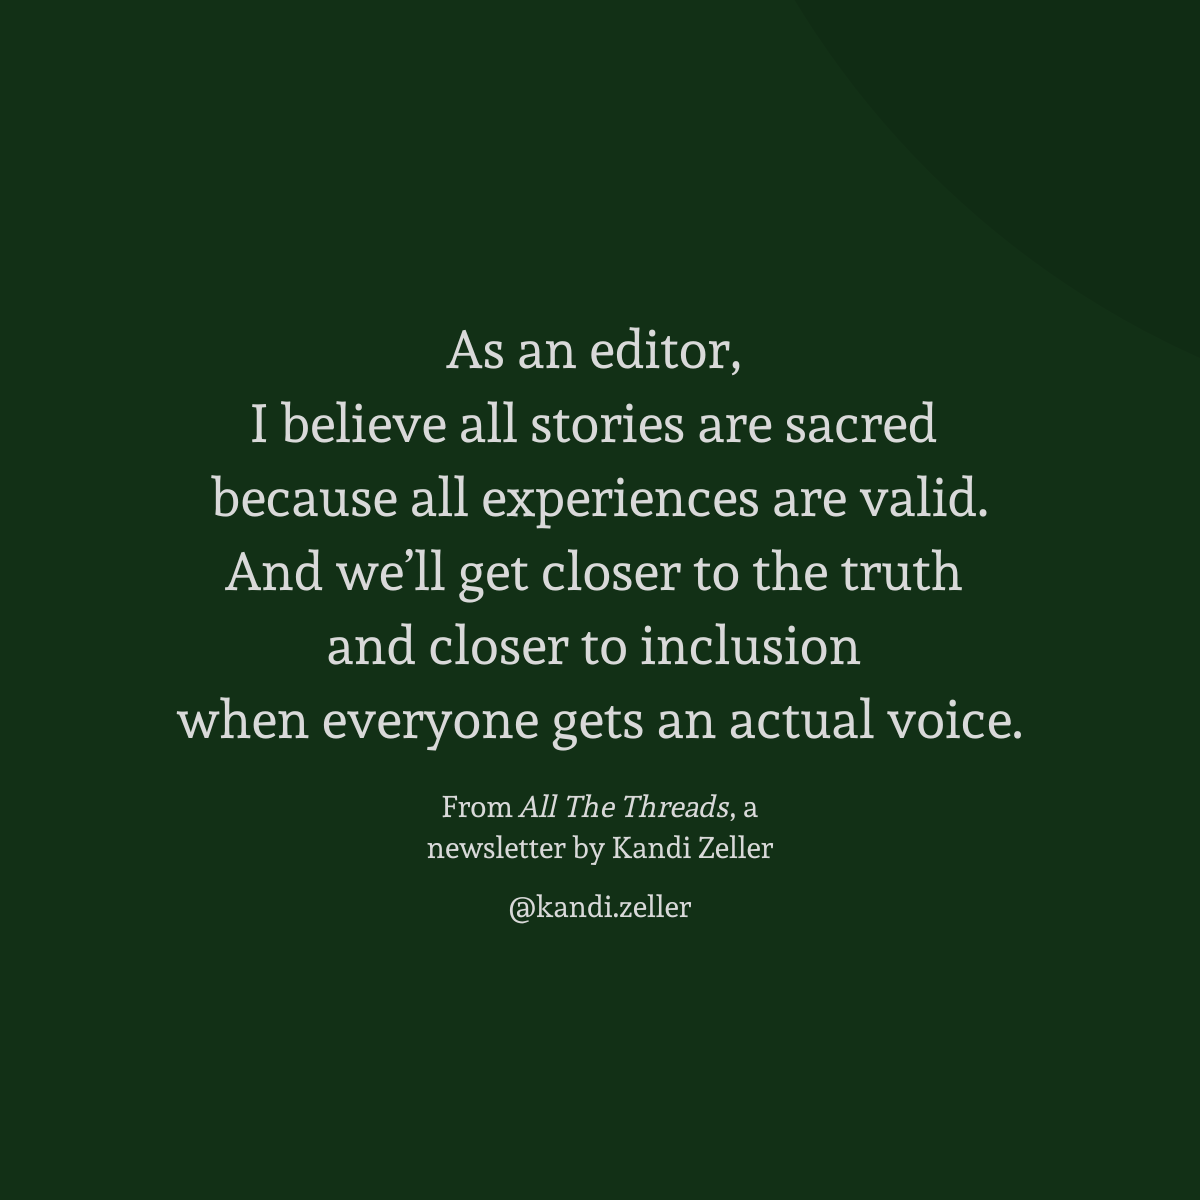 A dark green background with white lettering that reads, “As an editor, I believe all stories are sacred because all experiences are valid. And we’ll get closer to the truth and closer to inclusion when everyone gets an actual voice. From All The Threads, a newsletter by Kandi Zeller, @Kandi.Zeller” 